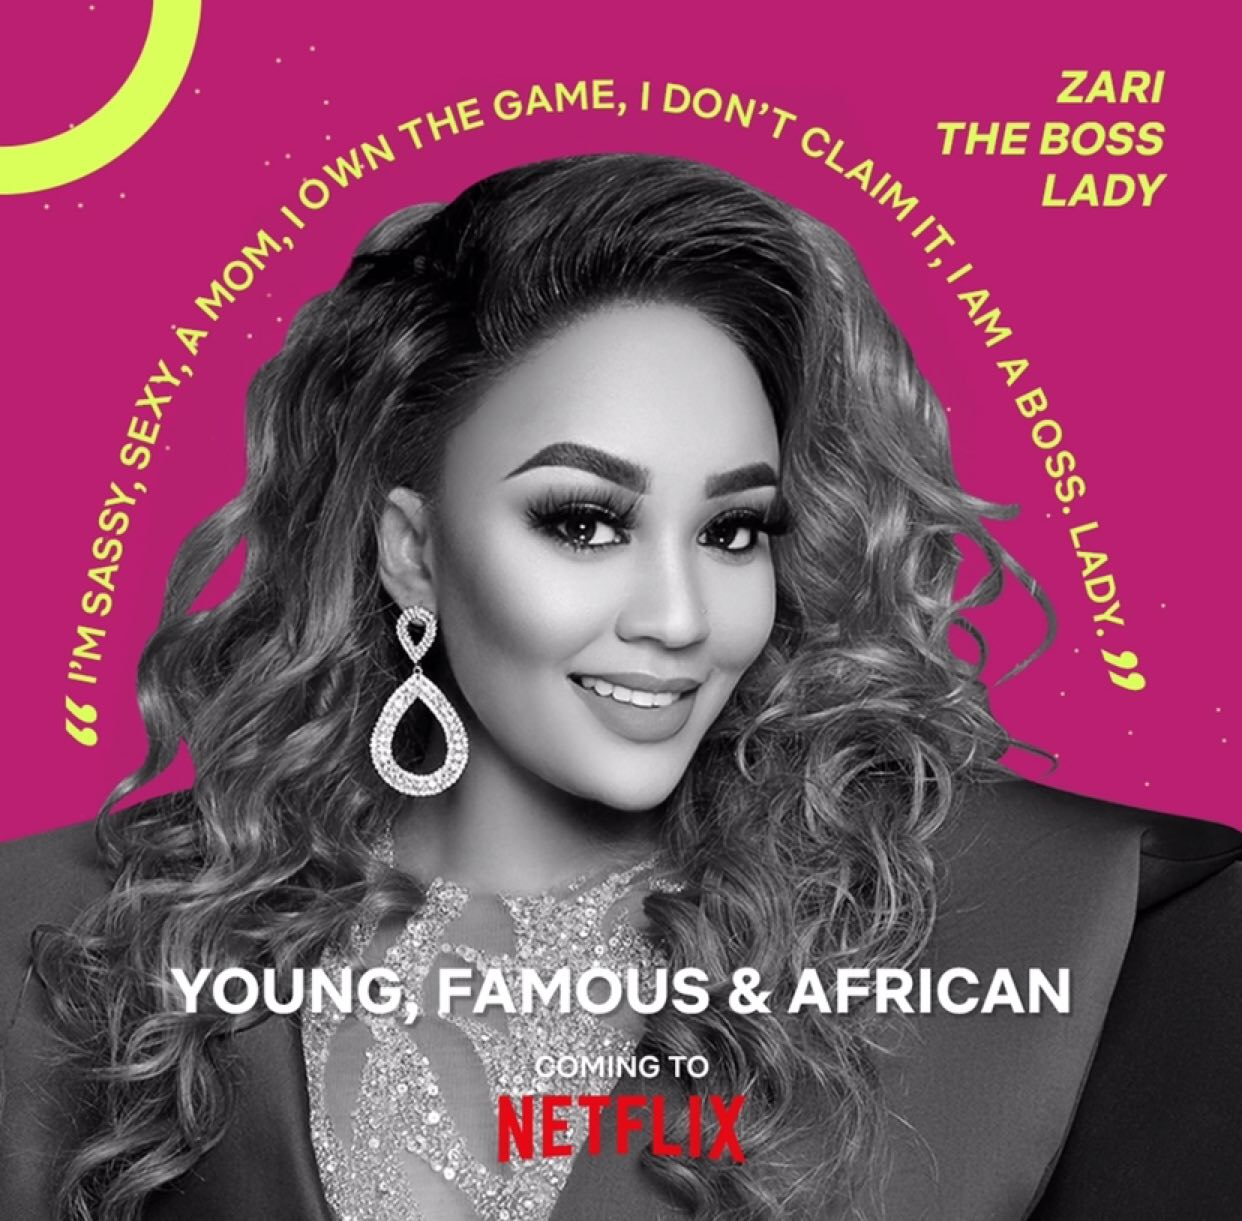 Did You Know Zari And Diamond Platnumz Are Starring In A New Netflix Reality Show? 